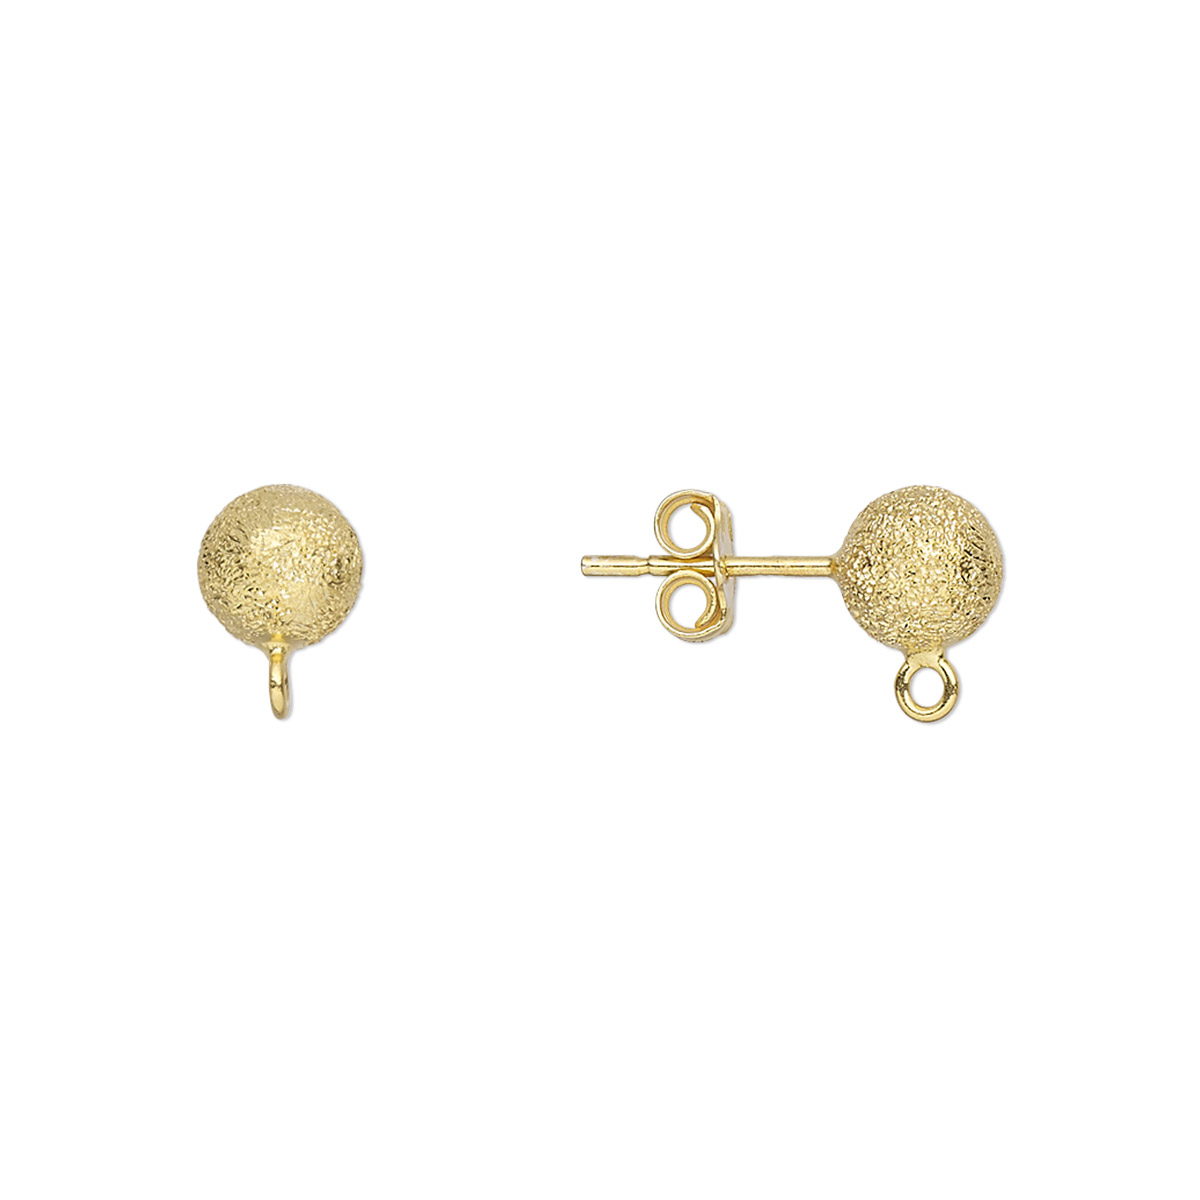 Earstud, gold-finished sterling silver, 6mm stardust ball with loop ...